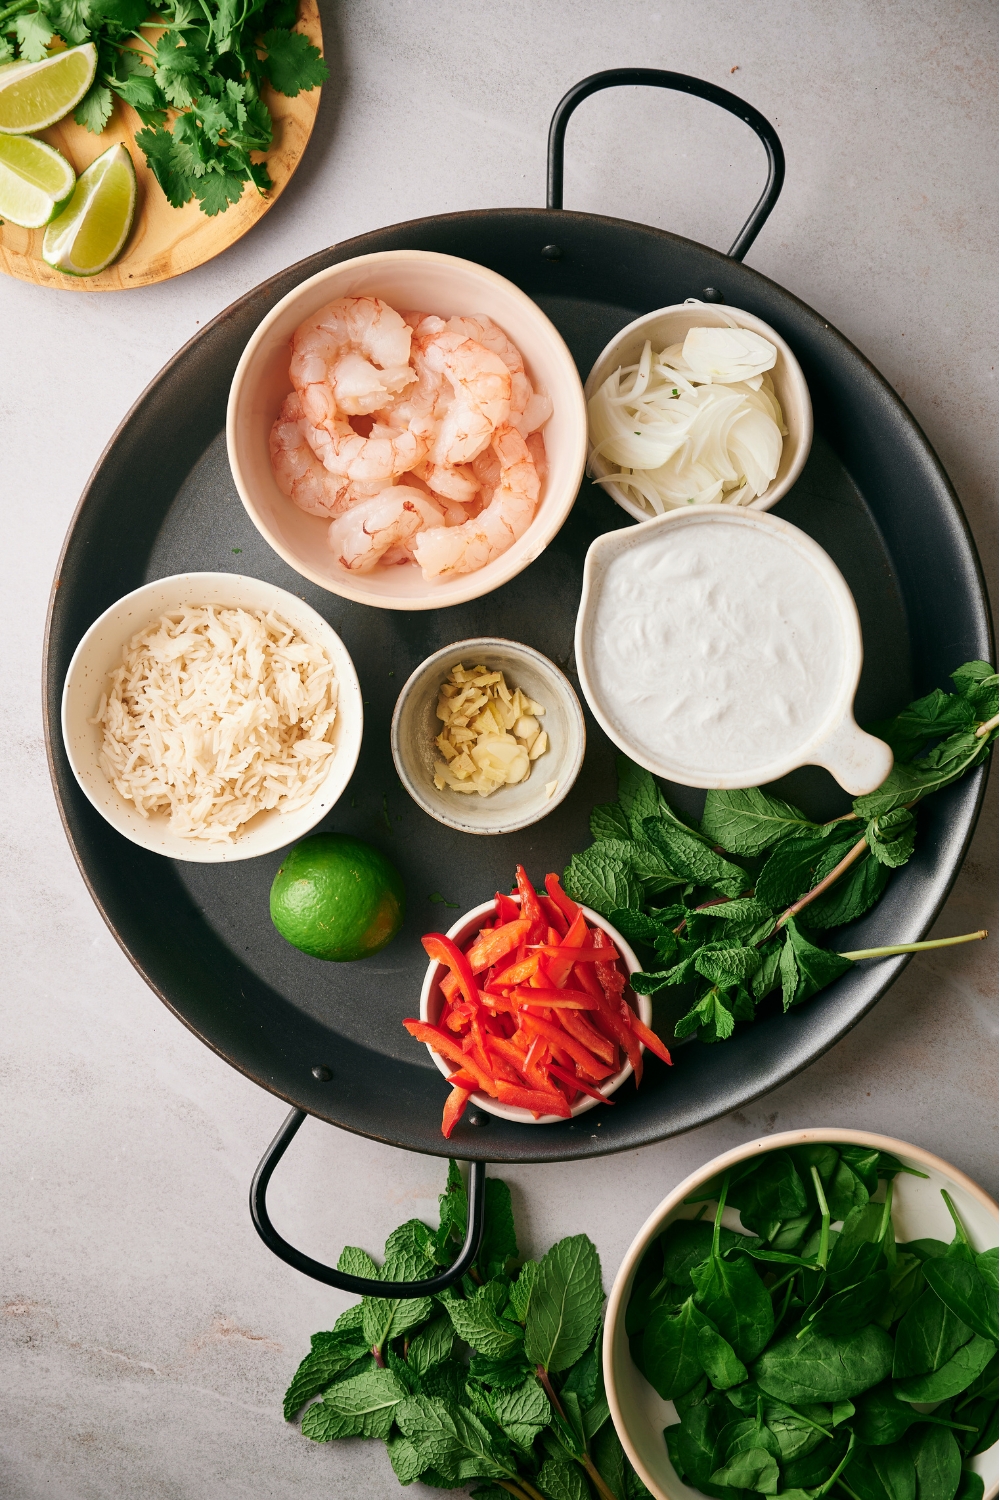 A bowl of shrimp, a bowl of diced onion, a bowl of rice, a bowl of ginger, a bowl of sliced bell peppers, and a lime on a serving plate.